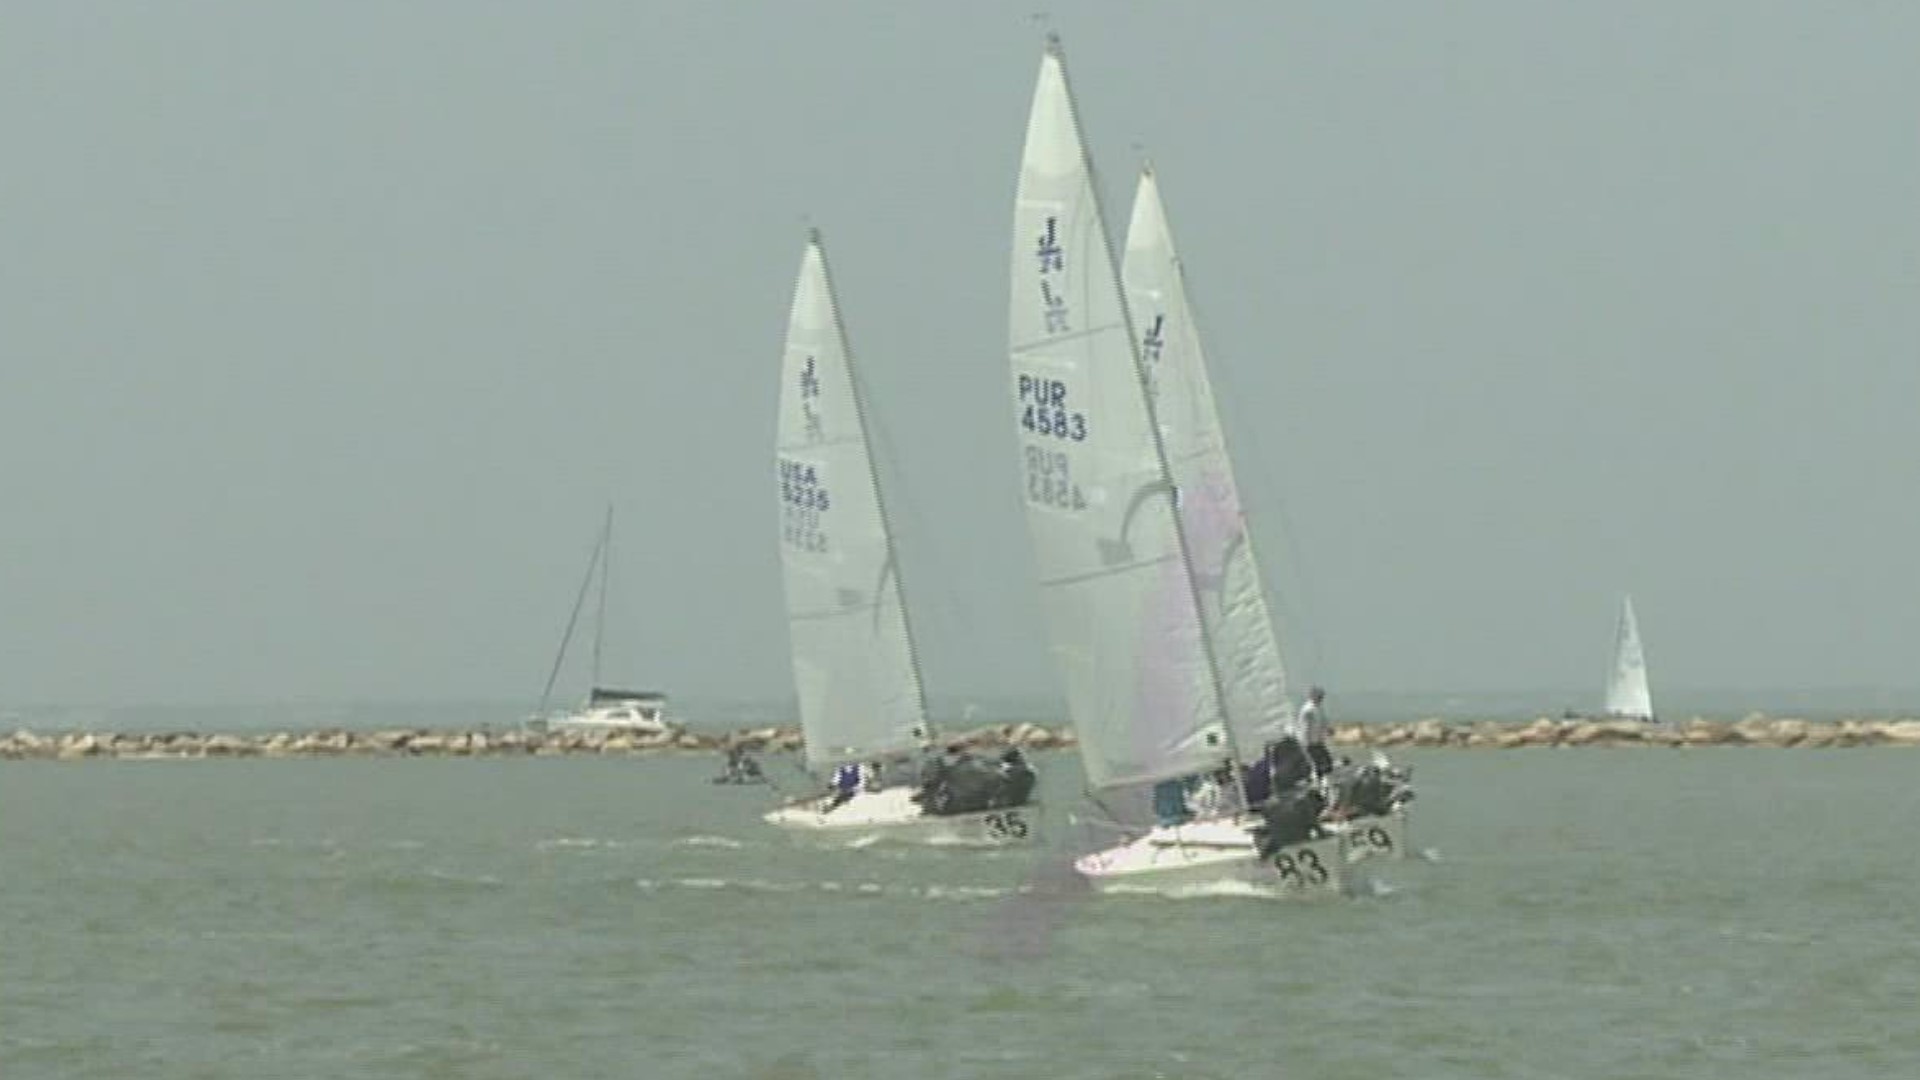 More than 200 sailors from nine different countries will race this week in Corpus Christi Bay.